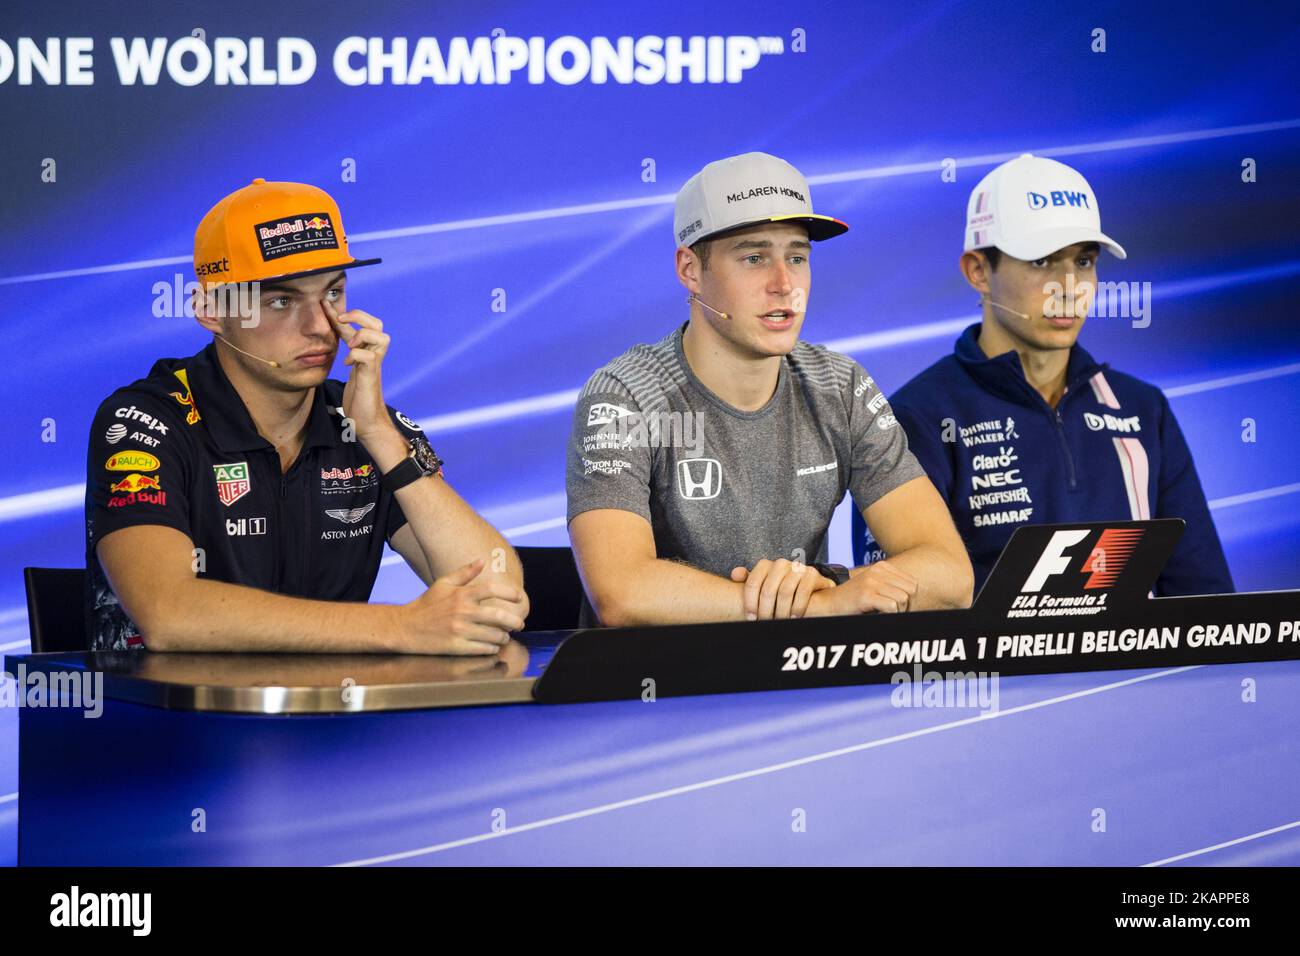 33 VERSTAPPEN Max from Nederlans of Red Bull Tag Heuer, 02 VANDOORNE Stoffel from Belgium of McLaren Honda and 31 OCON Esteban from France Force India during the official press conference during the Formula One Belgian Grand Prix at Circuit de Spa-Francorchamps on August 24, 2017 in Spa, Belgium. (Photo by Xavier Bonilla/NurPhoto) Stock Photo